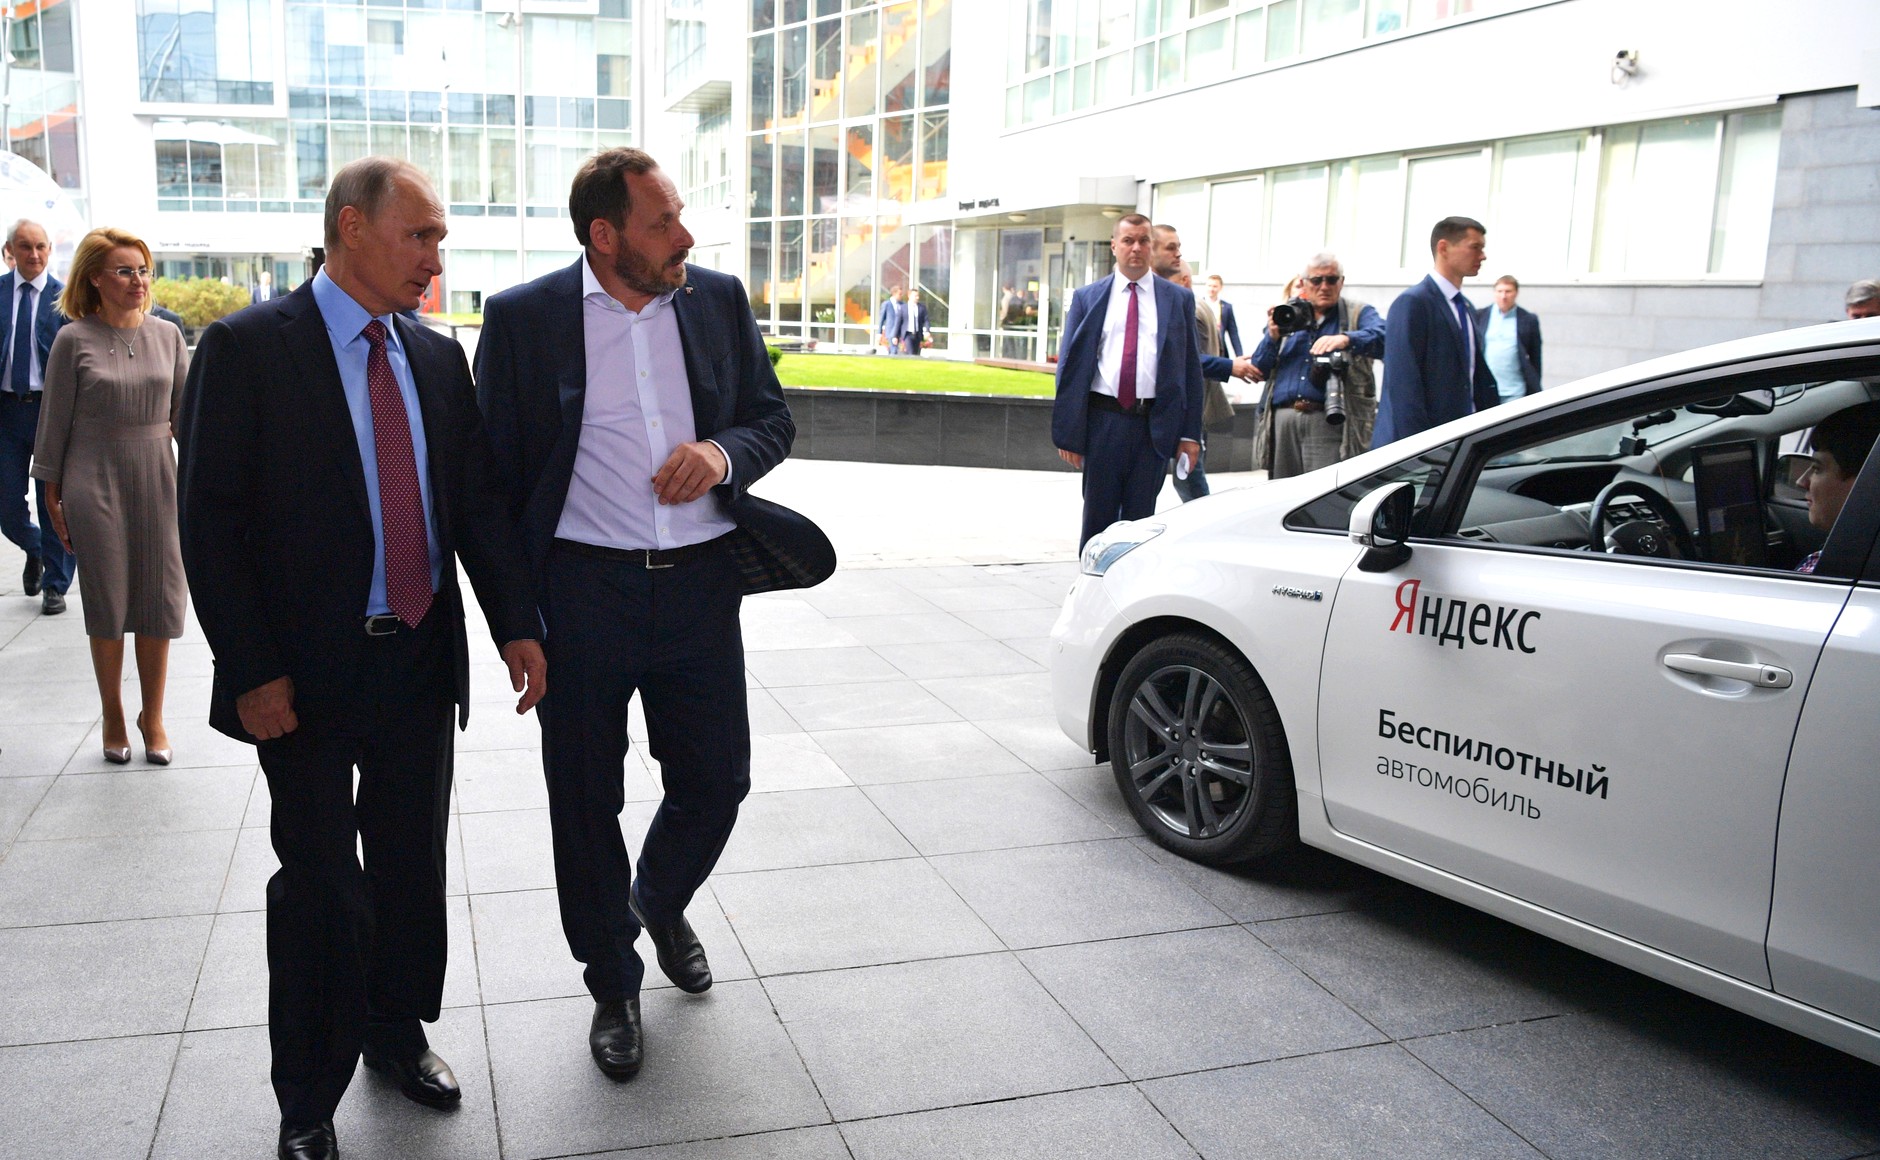 Visit to Yandex IT company office \u2022 President of Russia